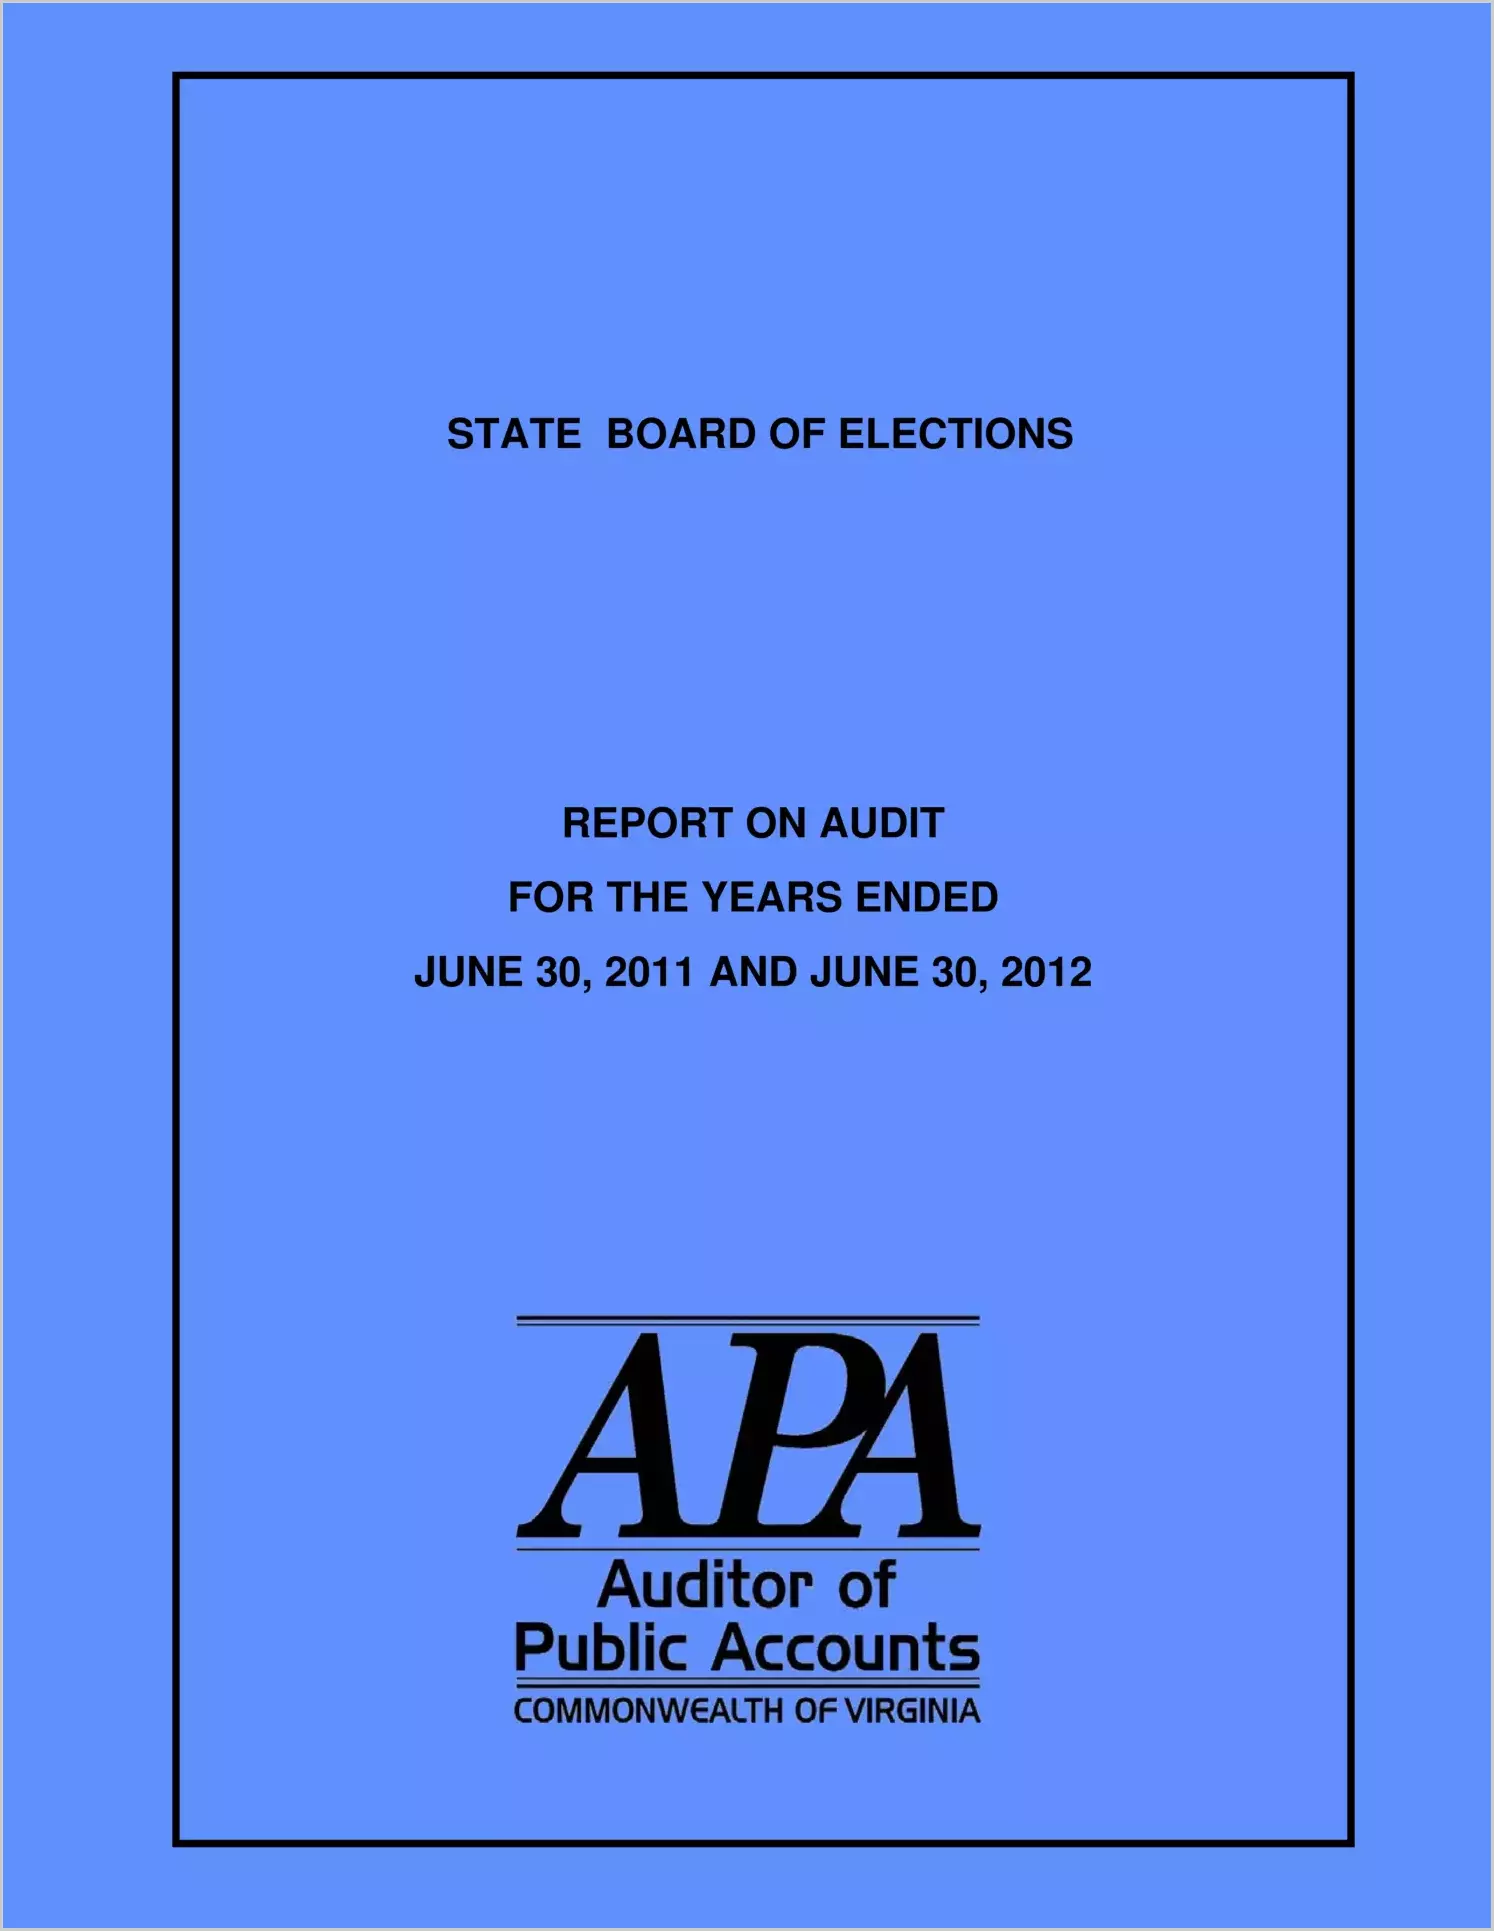 State Board of Elections For the years ended June 30, 2011 and June 30, 2012.